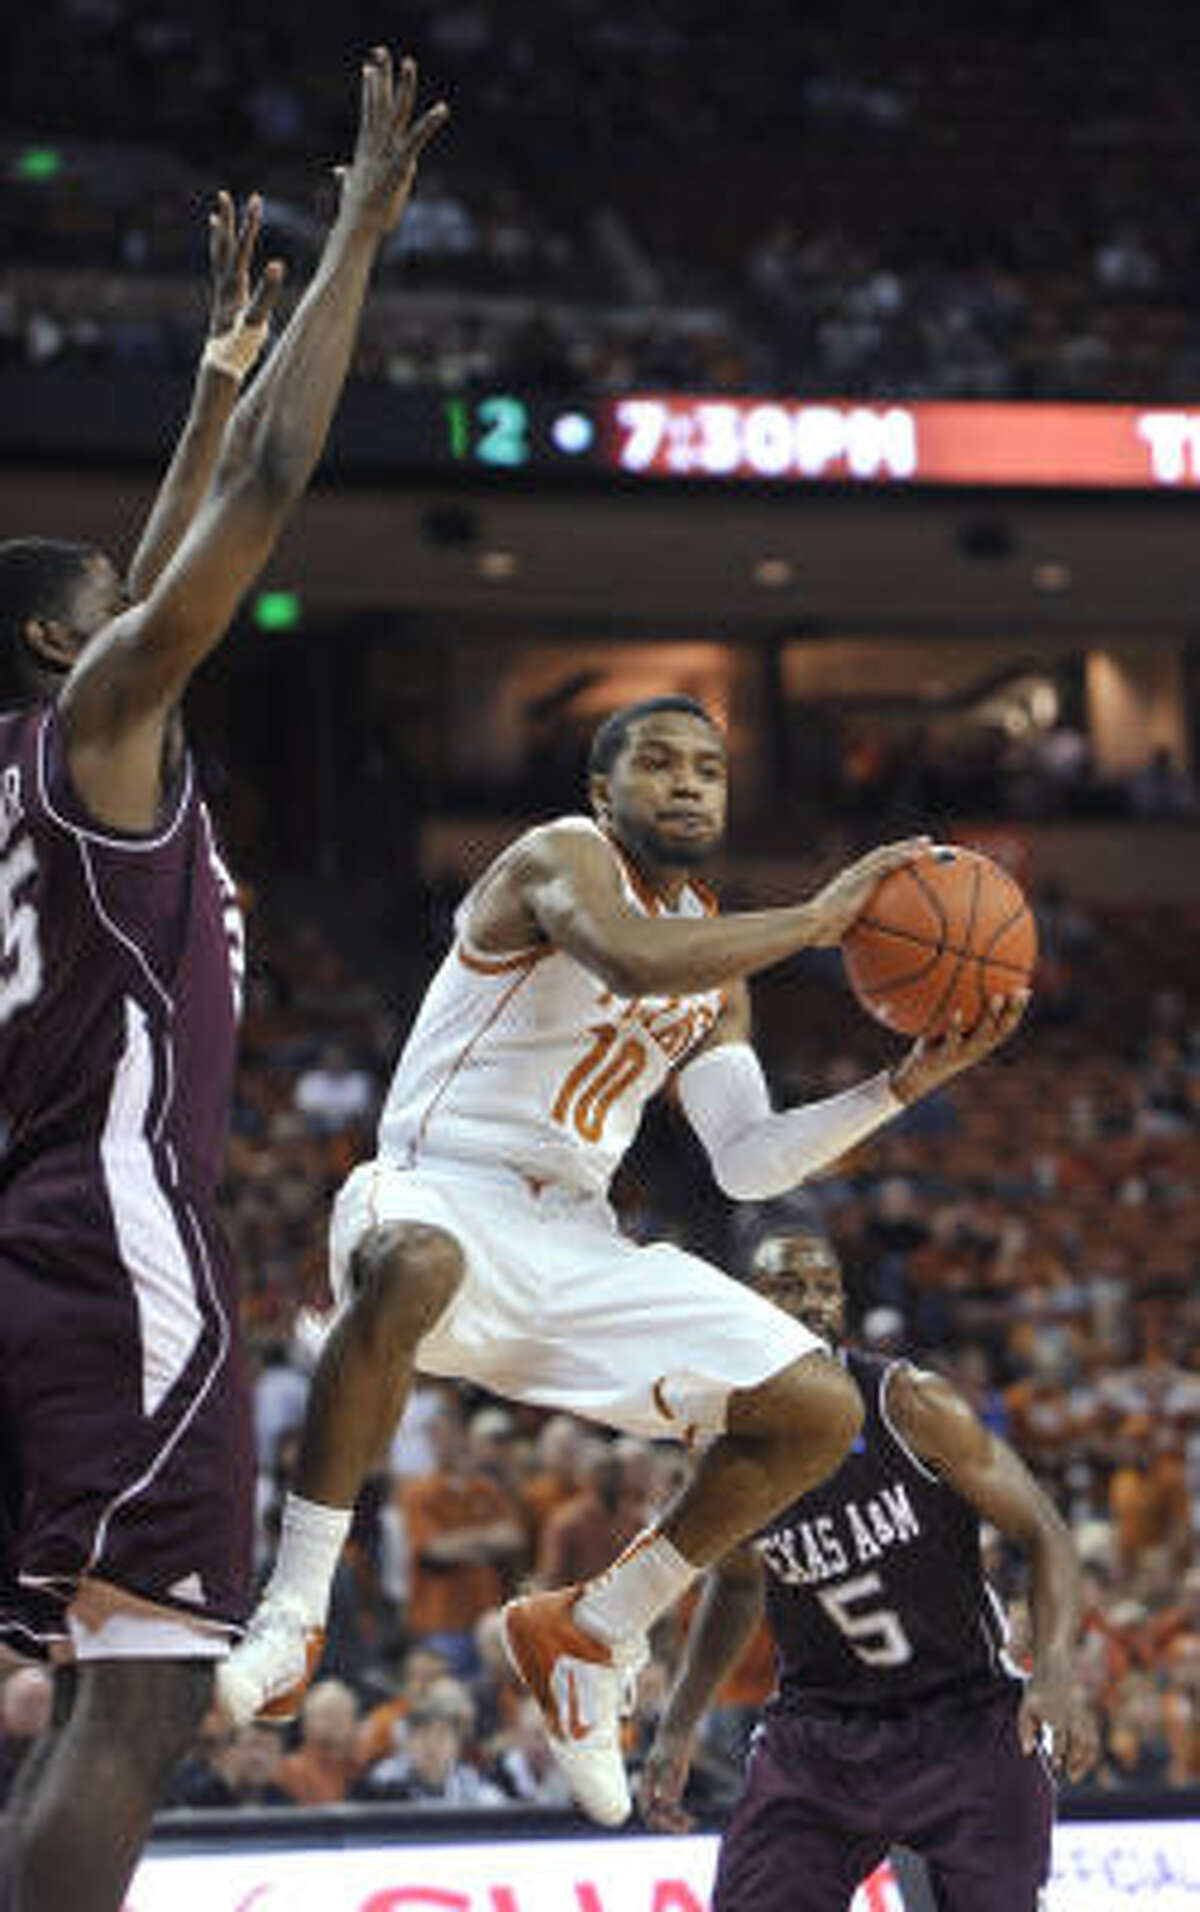 Texas guard Jai Lucas looks to pass as Texas A&M forward Ray Turner, left, defends during the second half.